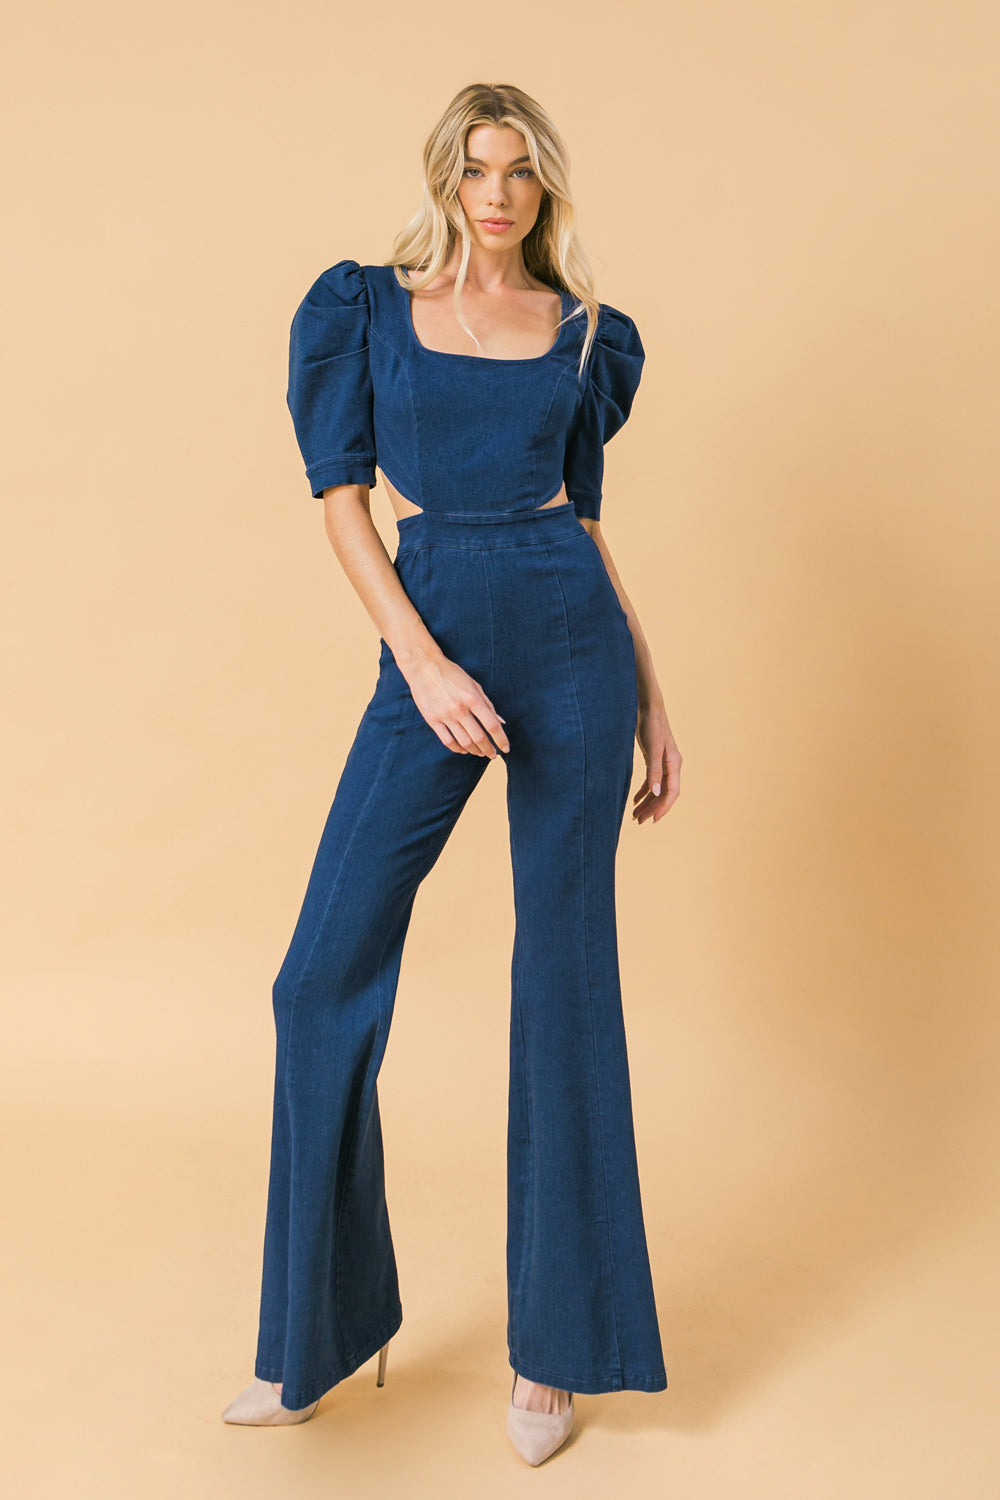 TRAVEL TO YOU DENIM JUMPSUIT